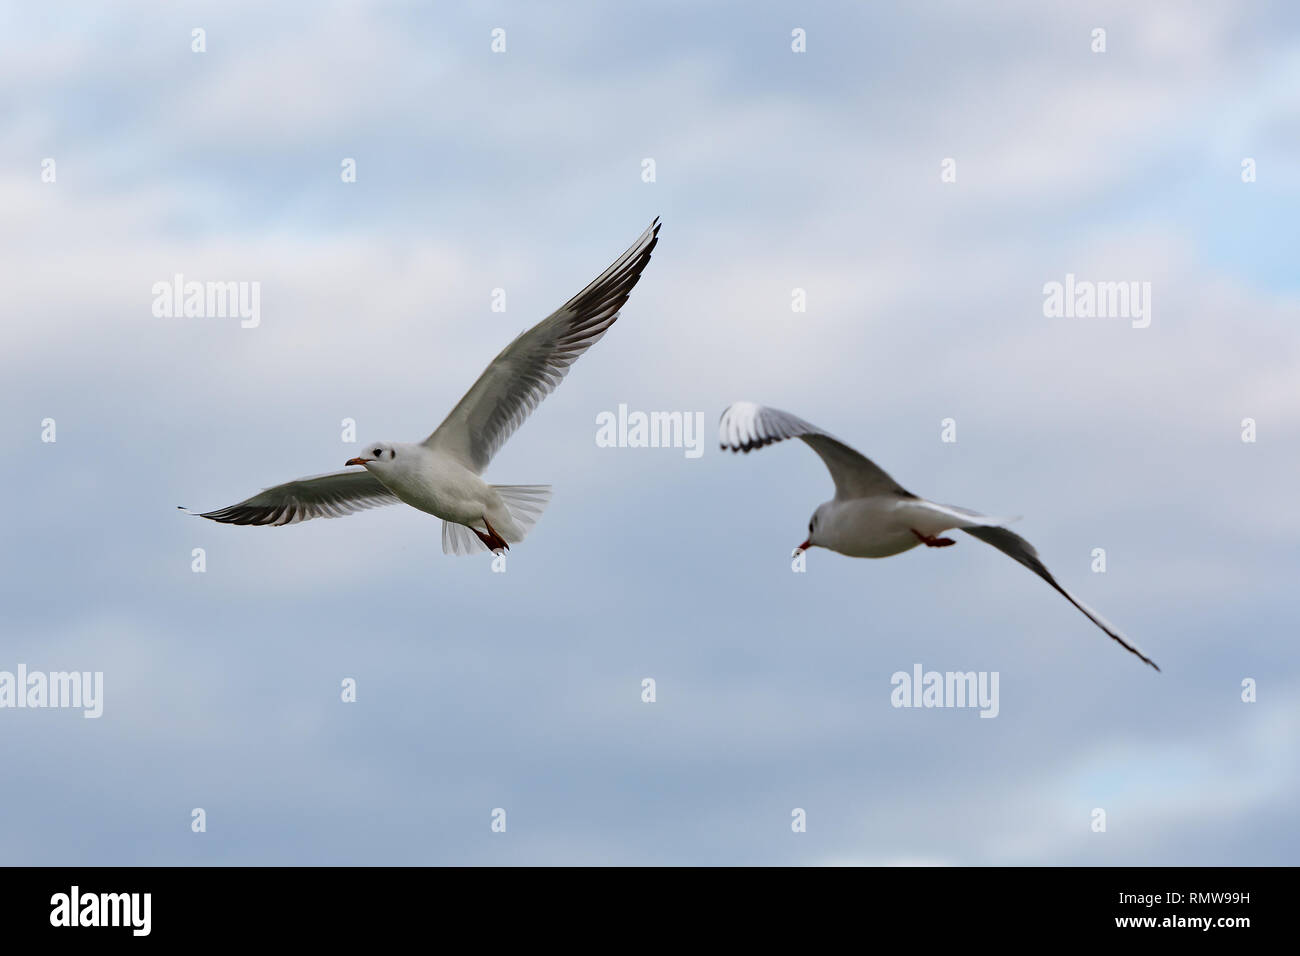 A seagull flying, with wings spread, in the background blue sky with clouds. Stock Photo